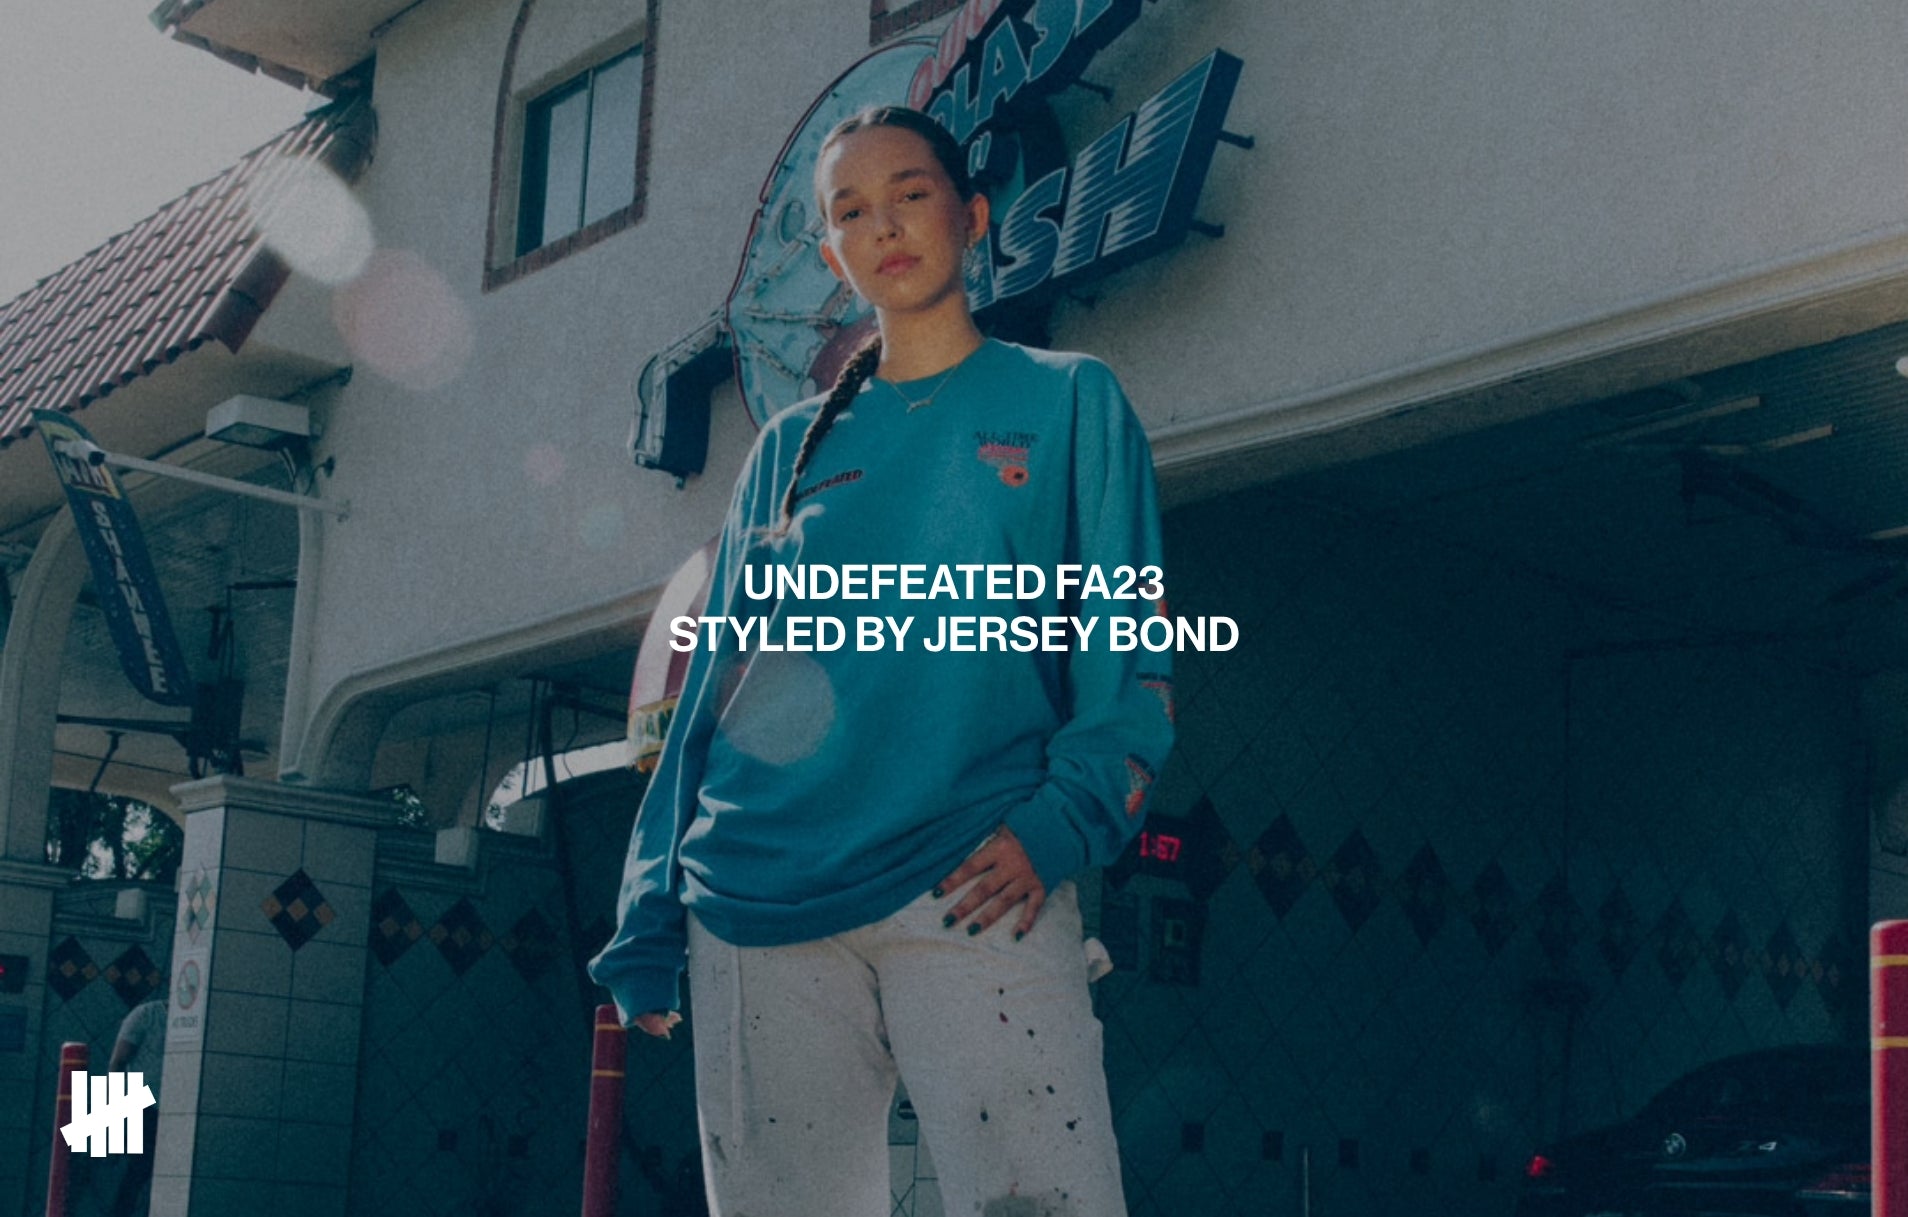 UNDEFEATED FA23 – STYLED BY JERSEY BOND